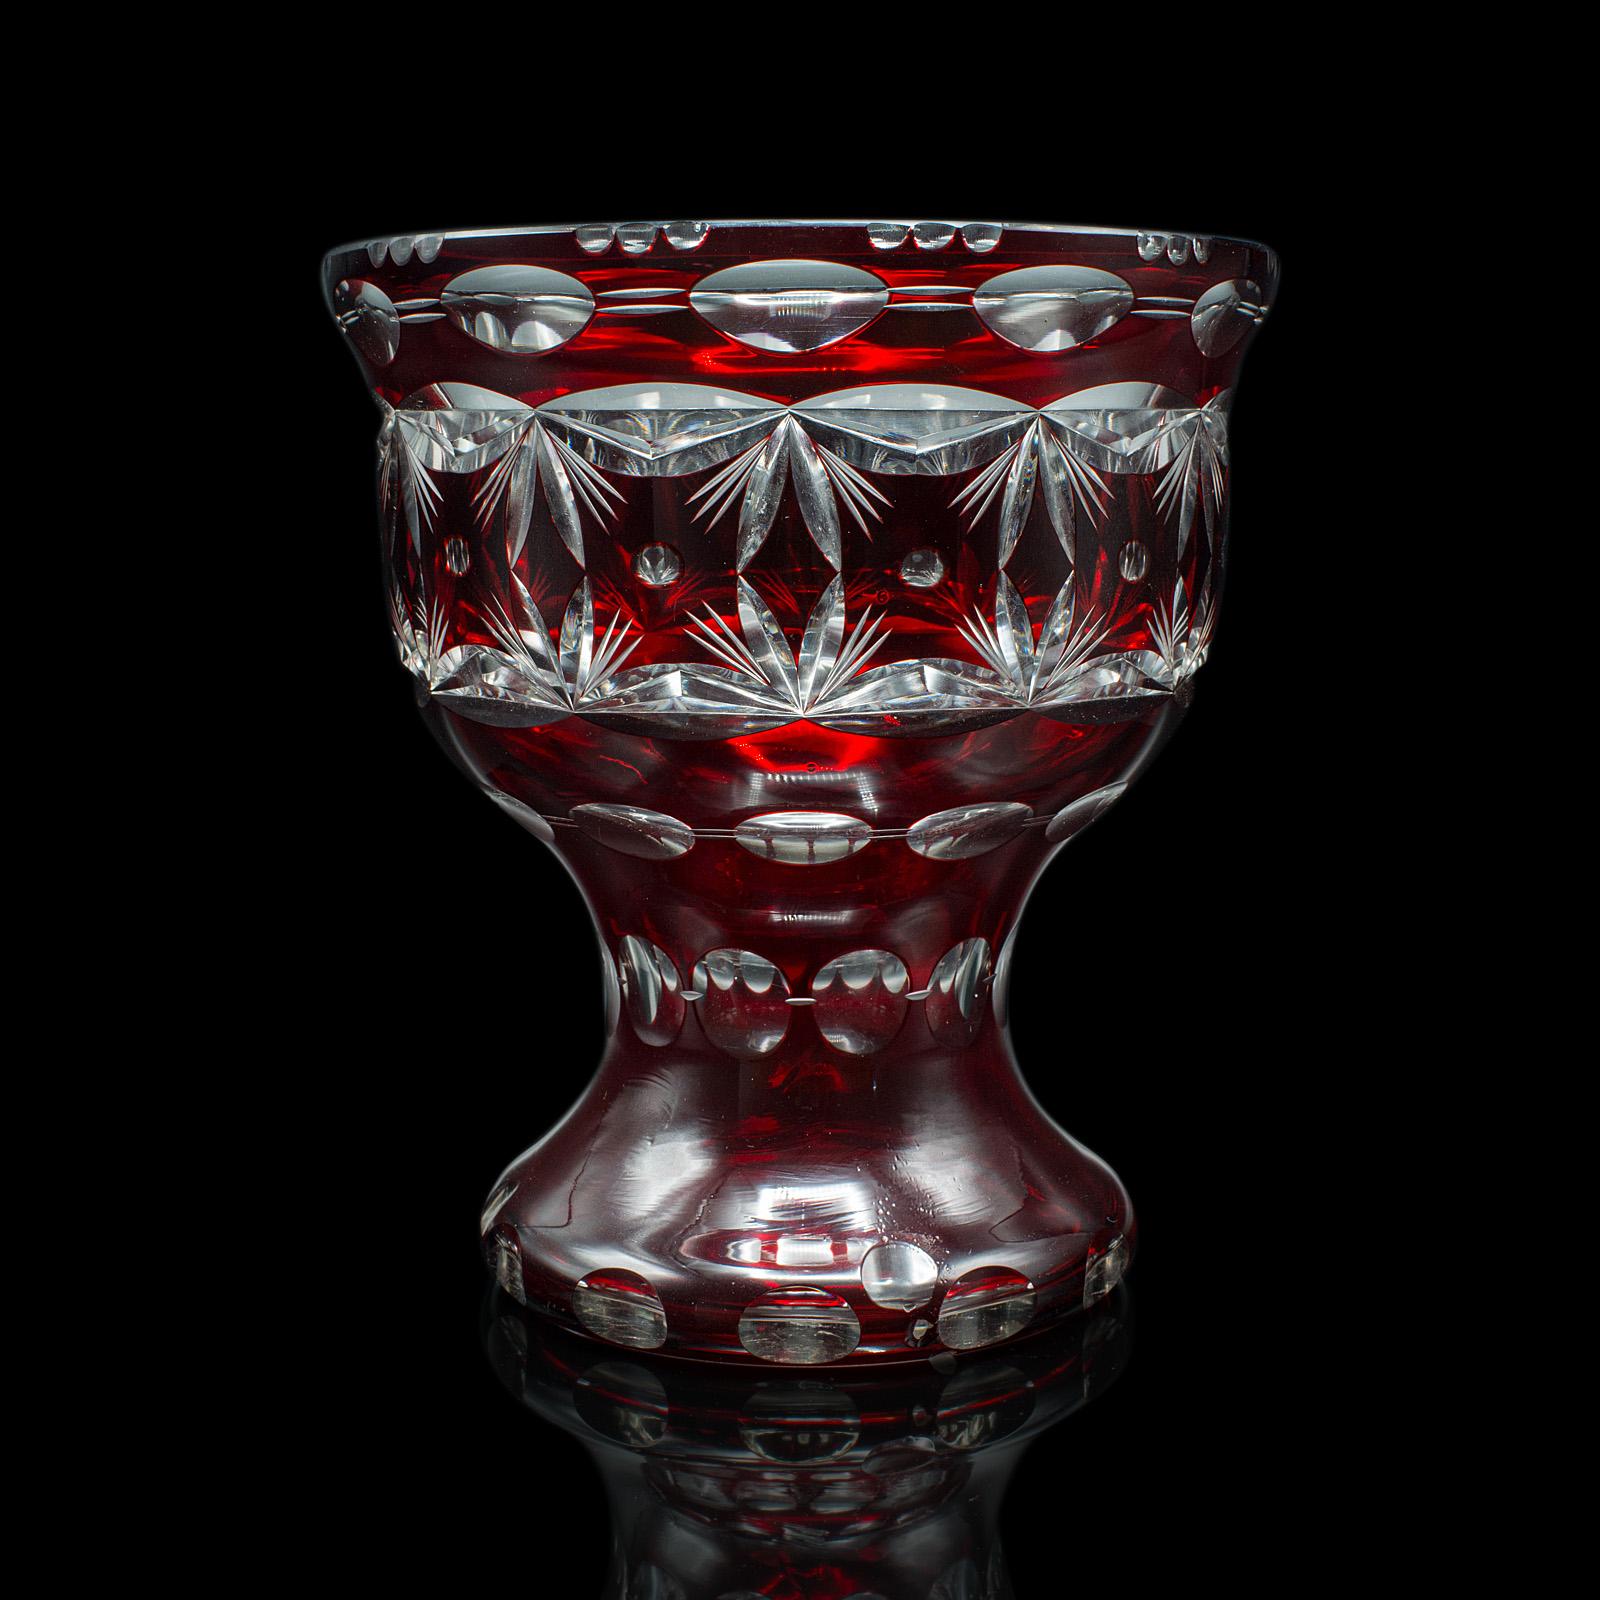 Antique Pedestal Bowl, Continental, Red Glass, Decorative Ice Bucket, Circa 1920 In Good Condition For Sale In Hele, Devon, GB